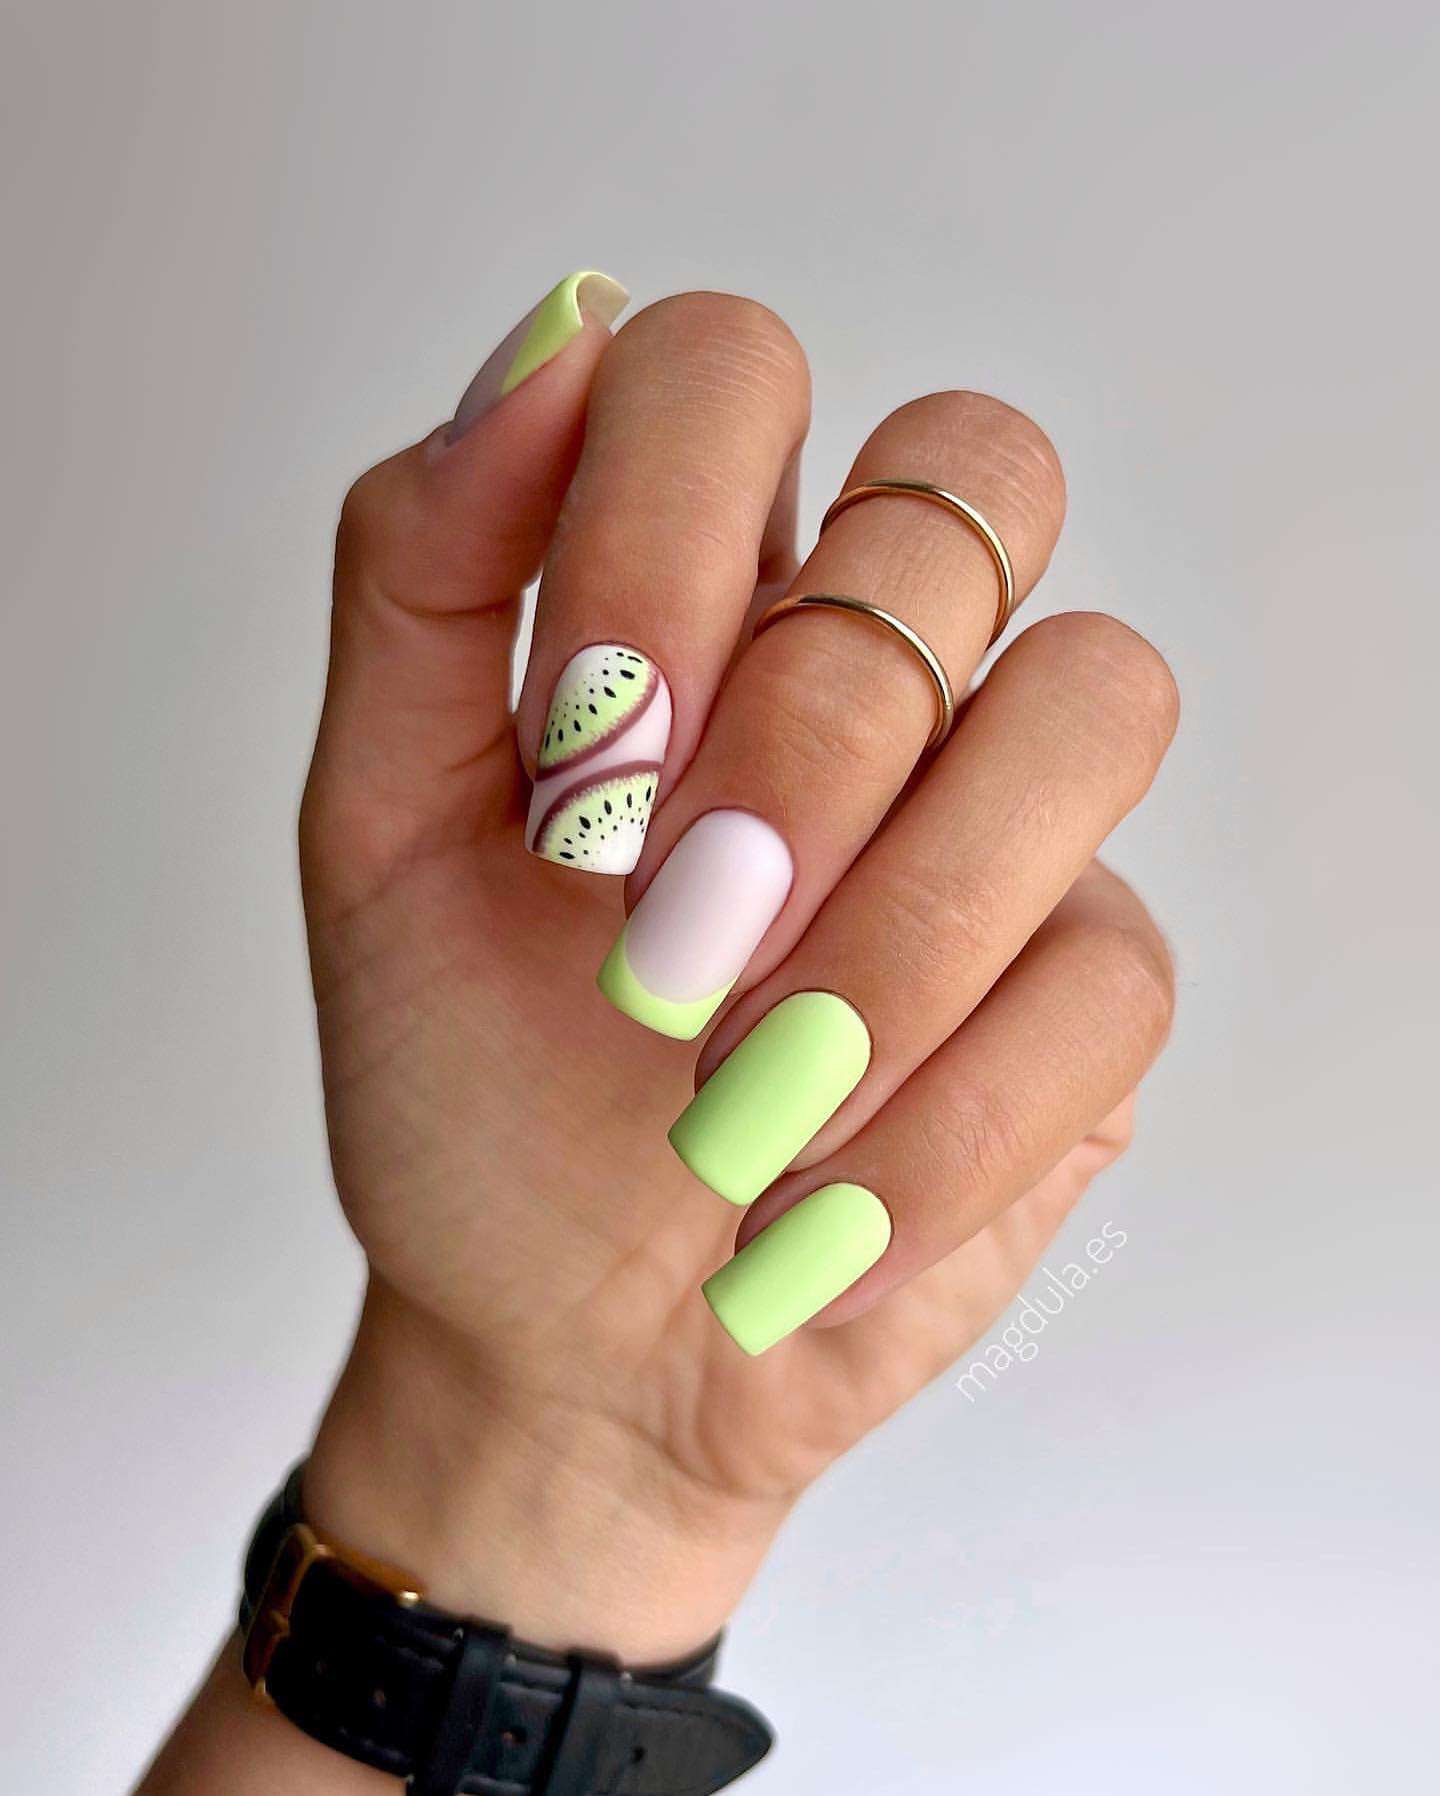 100+ Must Try Fall Nail Art Designs And Nail Ideas images 69